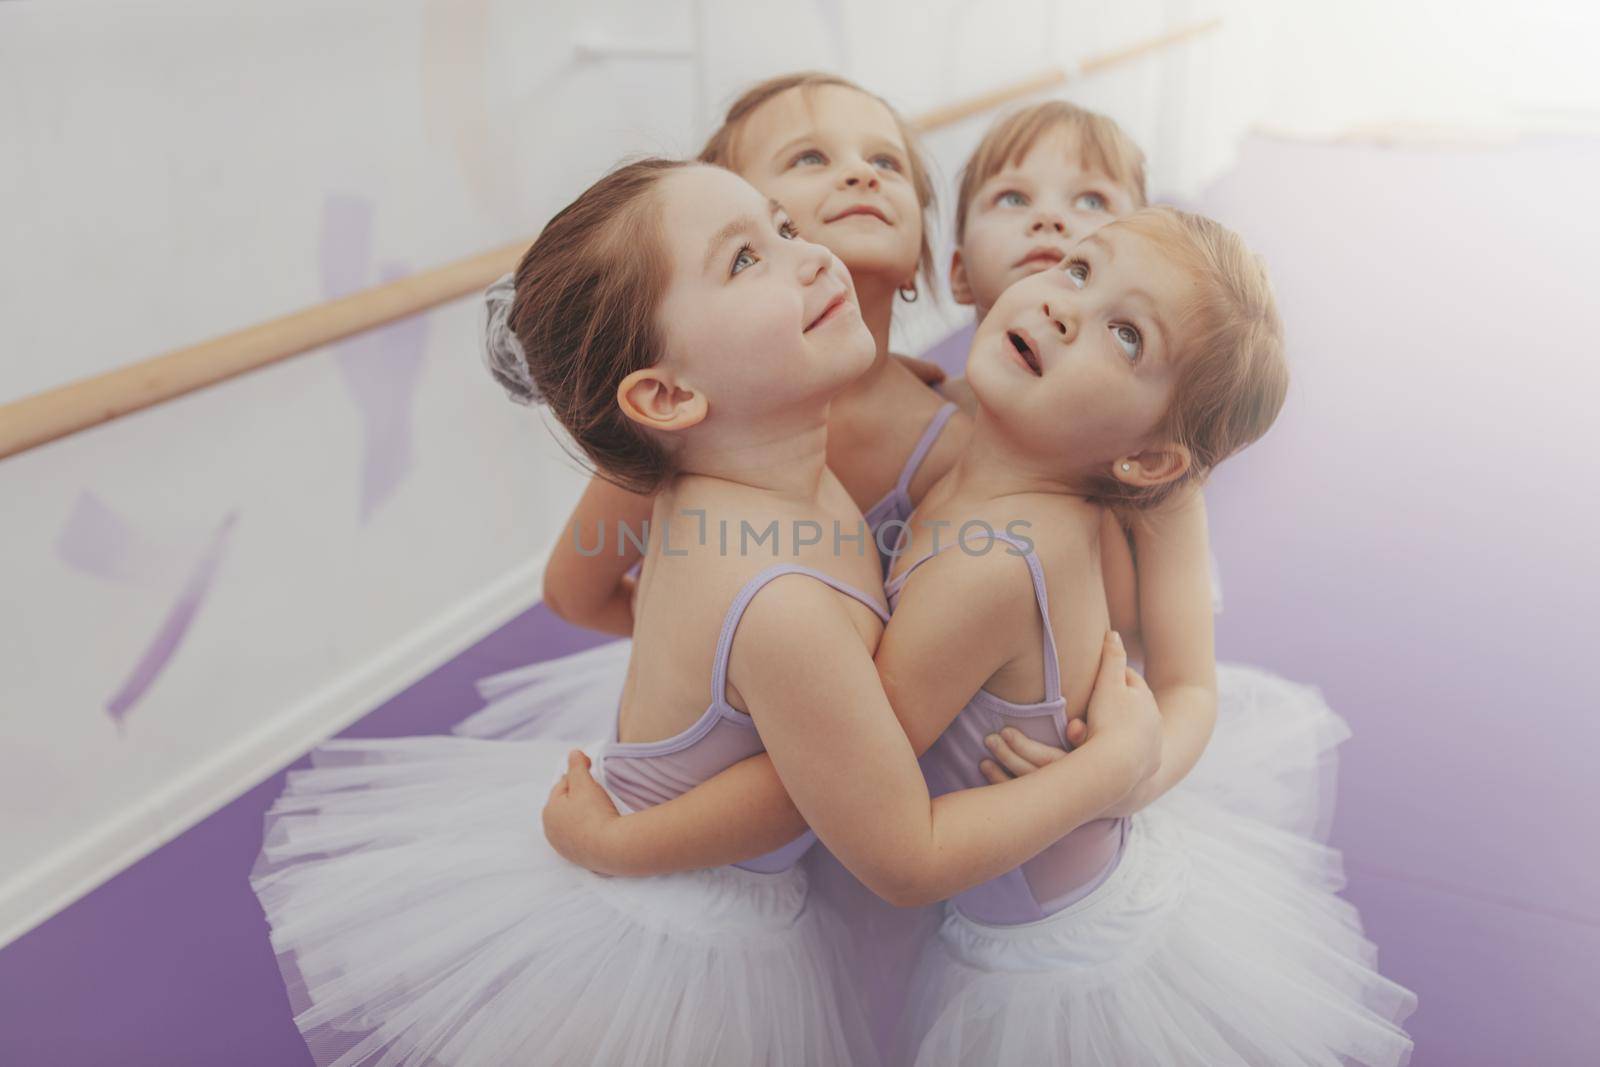 Adorable little girls in leotards and tutu skirts embracing, looking up joyfully. Group of cute young ballerinas having fun after ballet class, copy space. Friendship, childhood, sisterhood concept